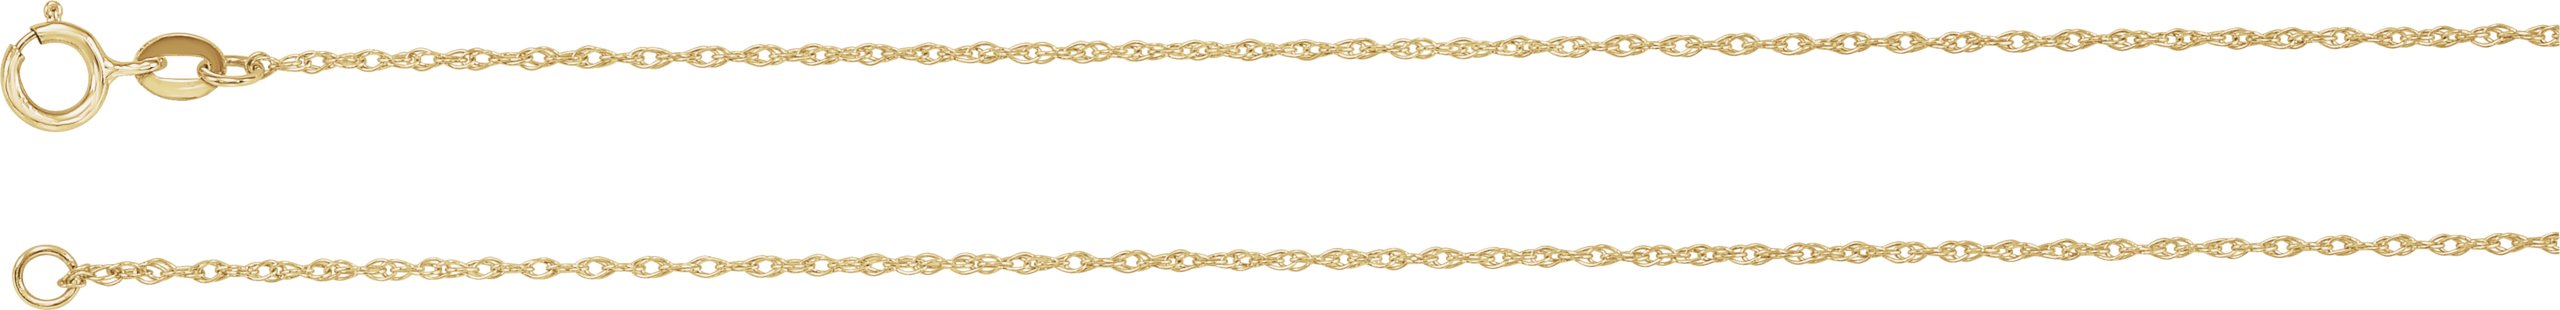 14K Yellow Gold Filled 1 mm Solid Rope 18 inch Chain Ref. 158187